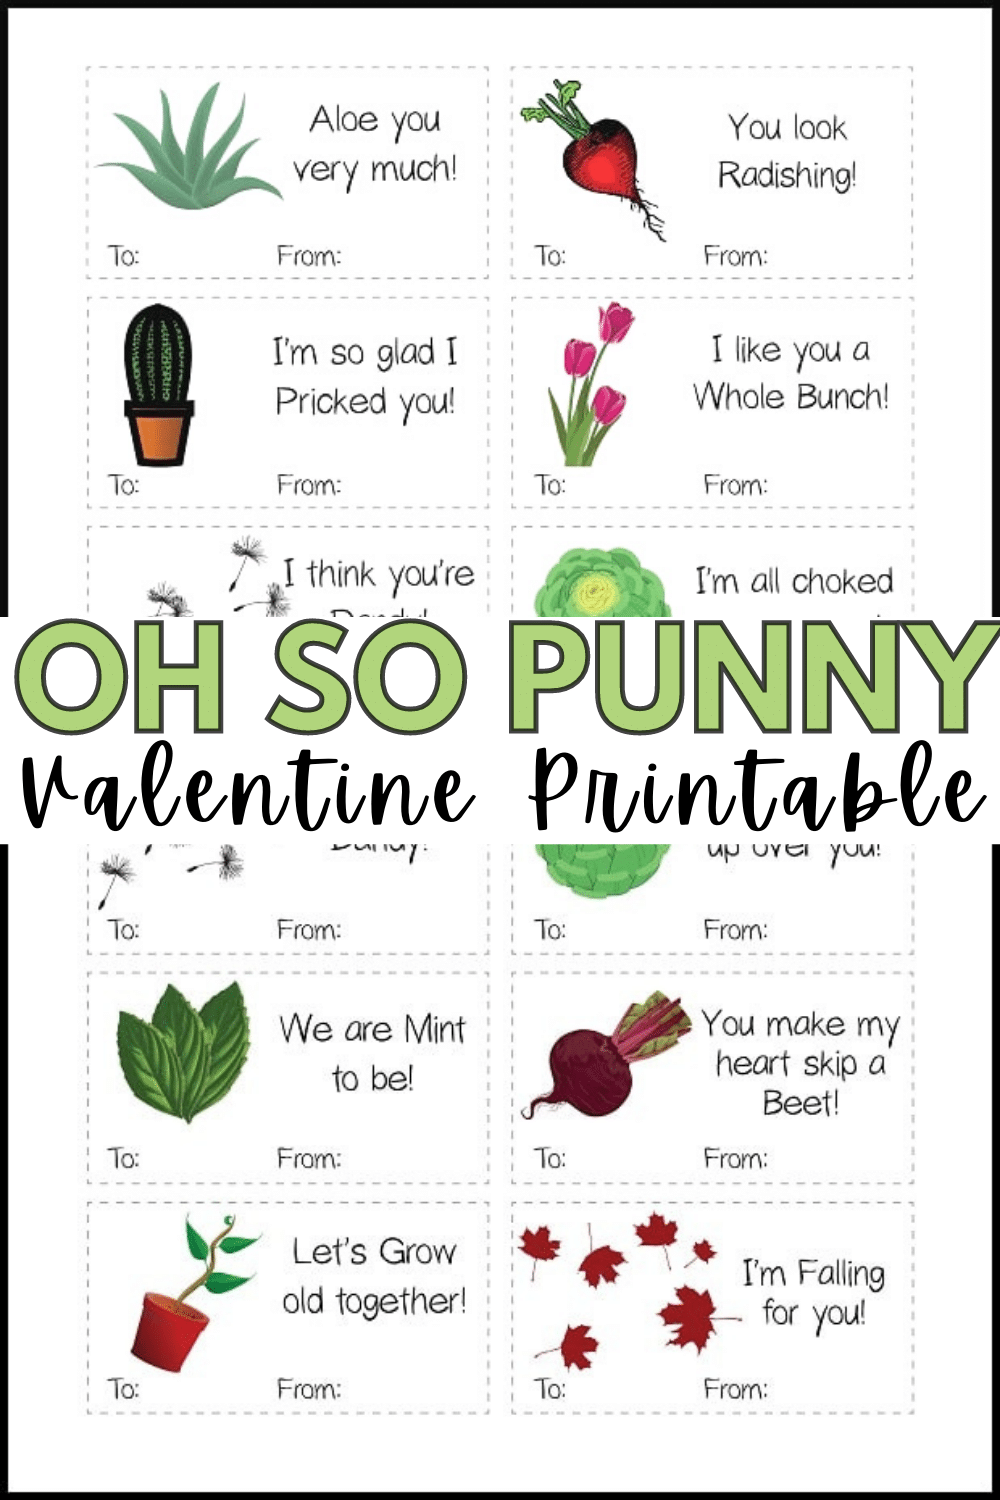 Three sets of very punny printable Valentines, plus clever ideas for making them extra memorable! #Valentines #punny #printables via @wondermomwannab